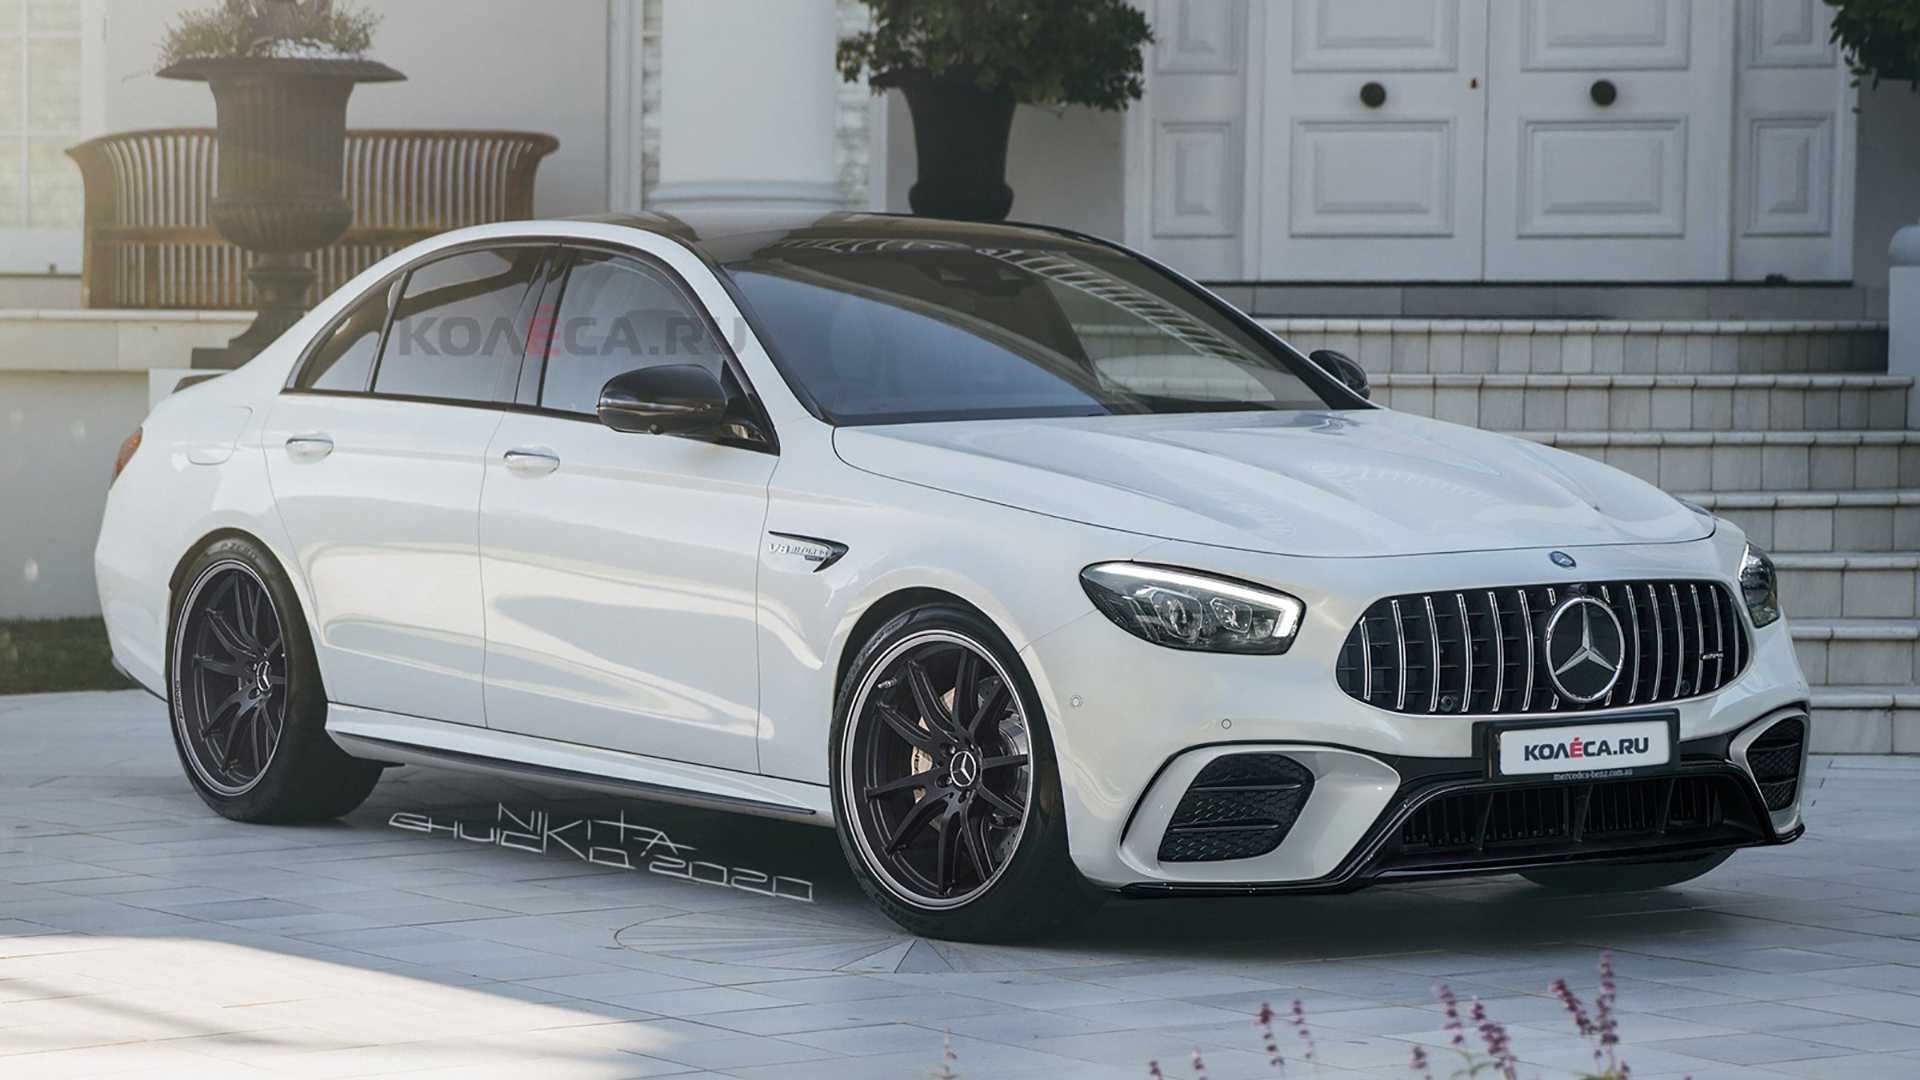 Mercedes AMG E63 Leaked Image Lead To Realistic Rendering